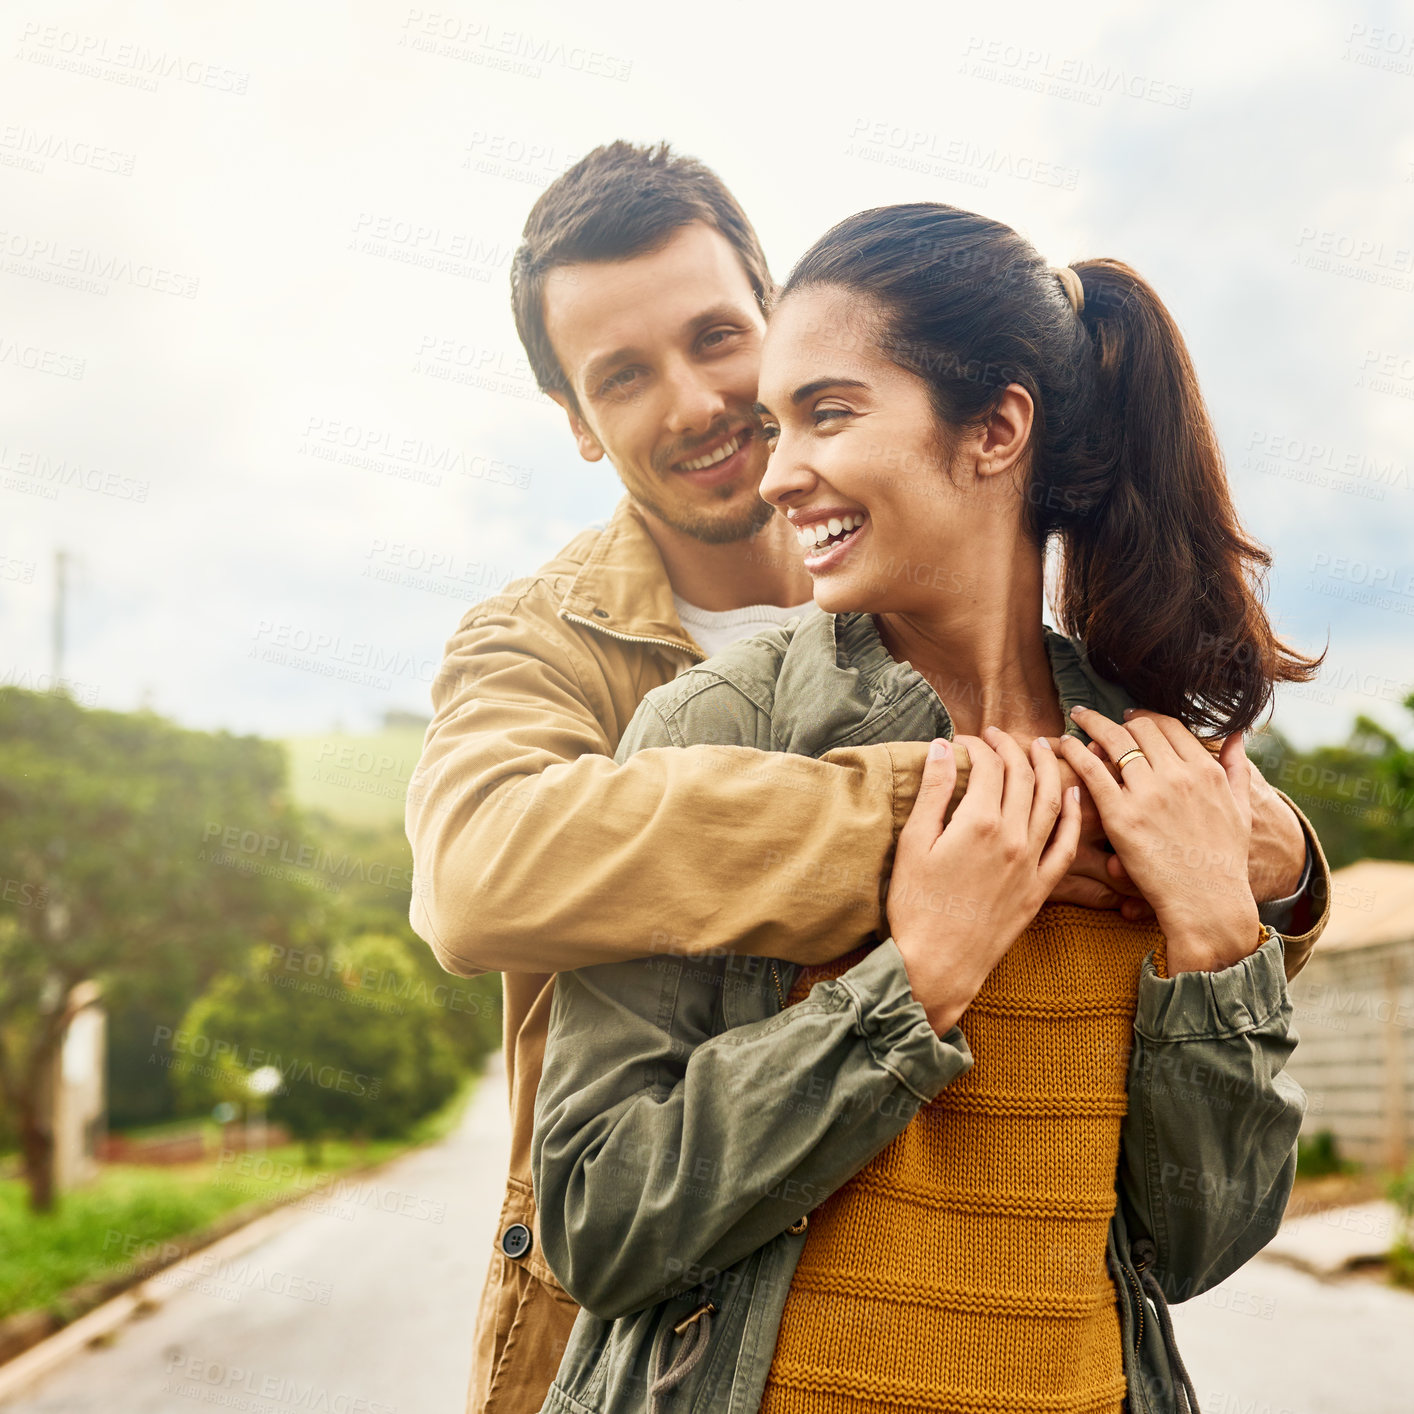 Buy stock photo Cropped shot of an affectionate young couple standing outdoors